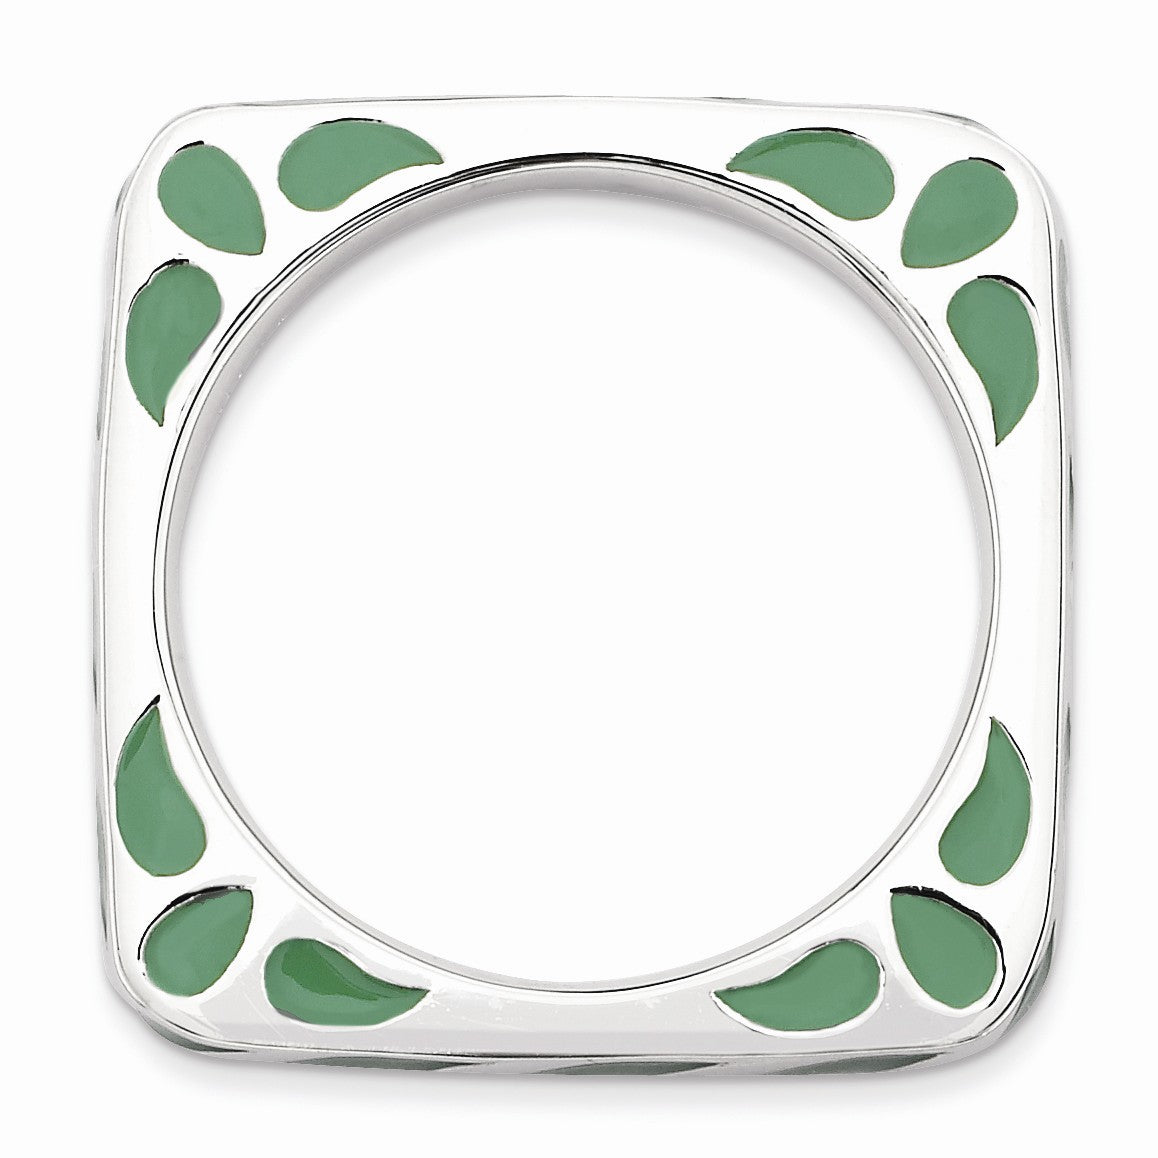 Alternate view of the 3.25mm Silver and Green Enamel Stackable Square Band by The Black Bow Jewelry Co.